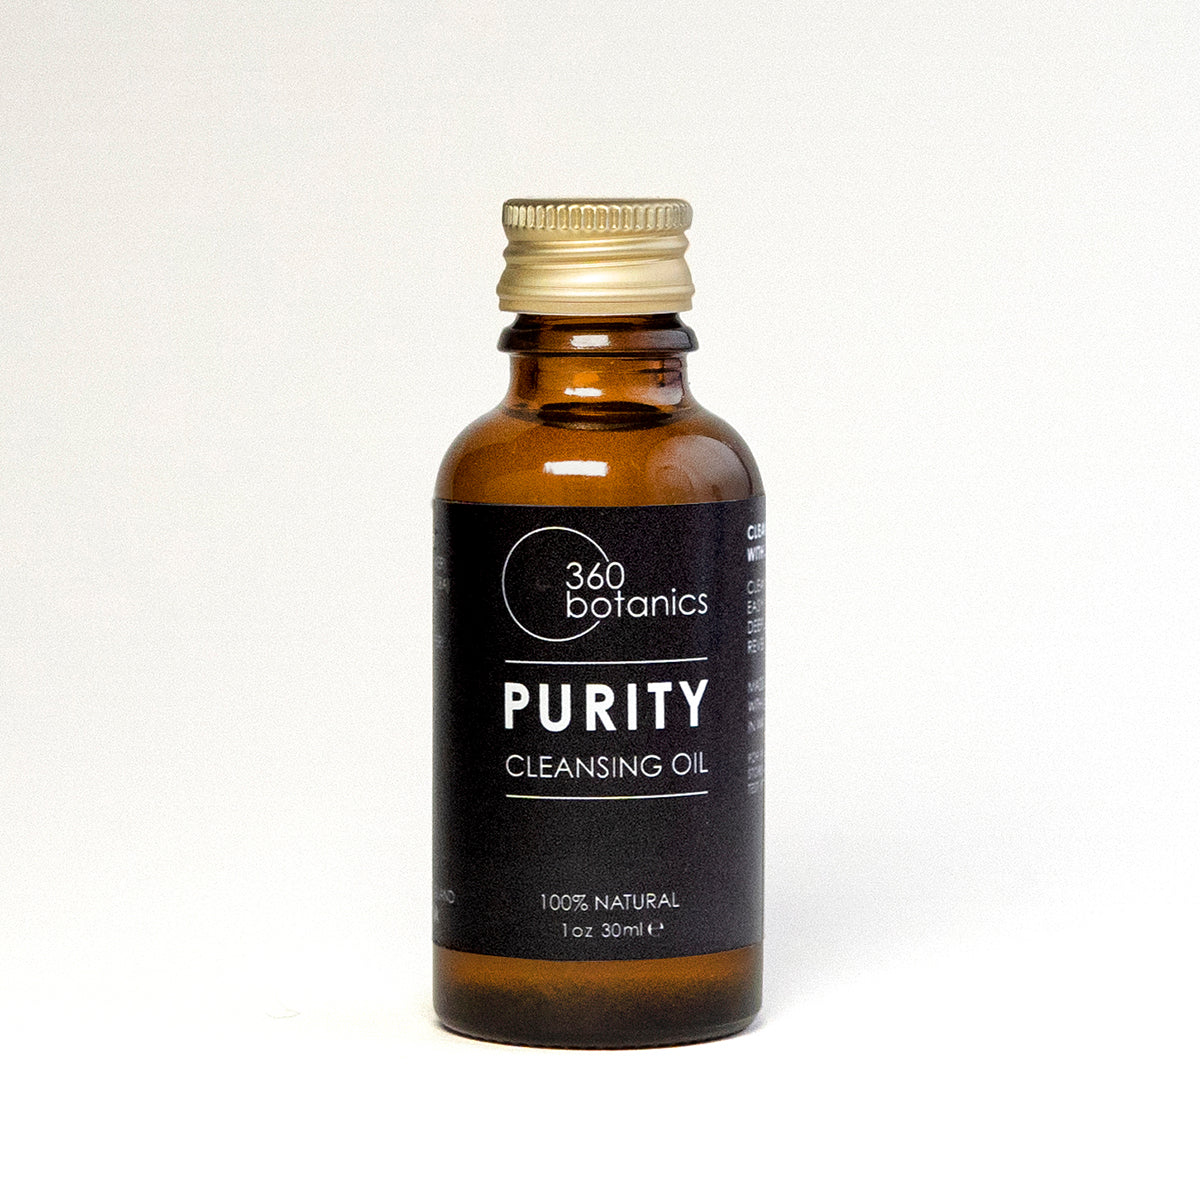 Purity Cleansing oil product in glass amber jar, refill, white background